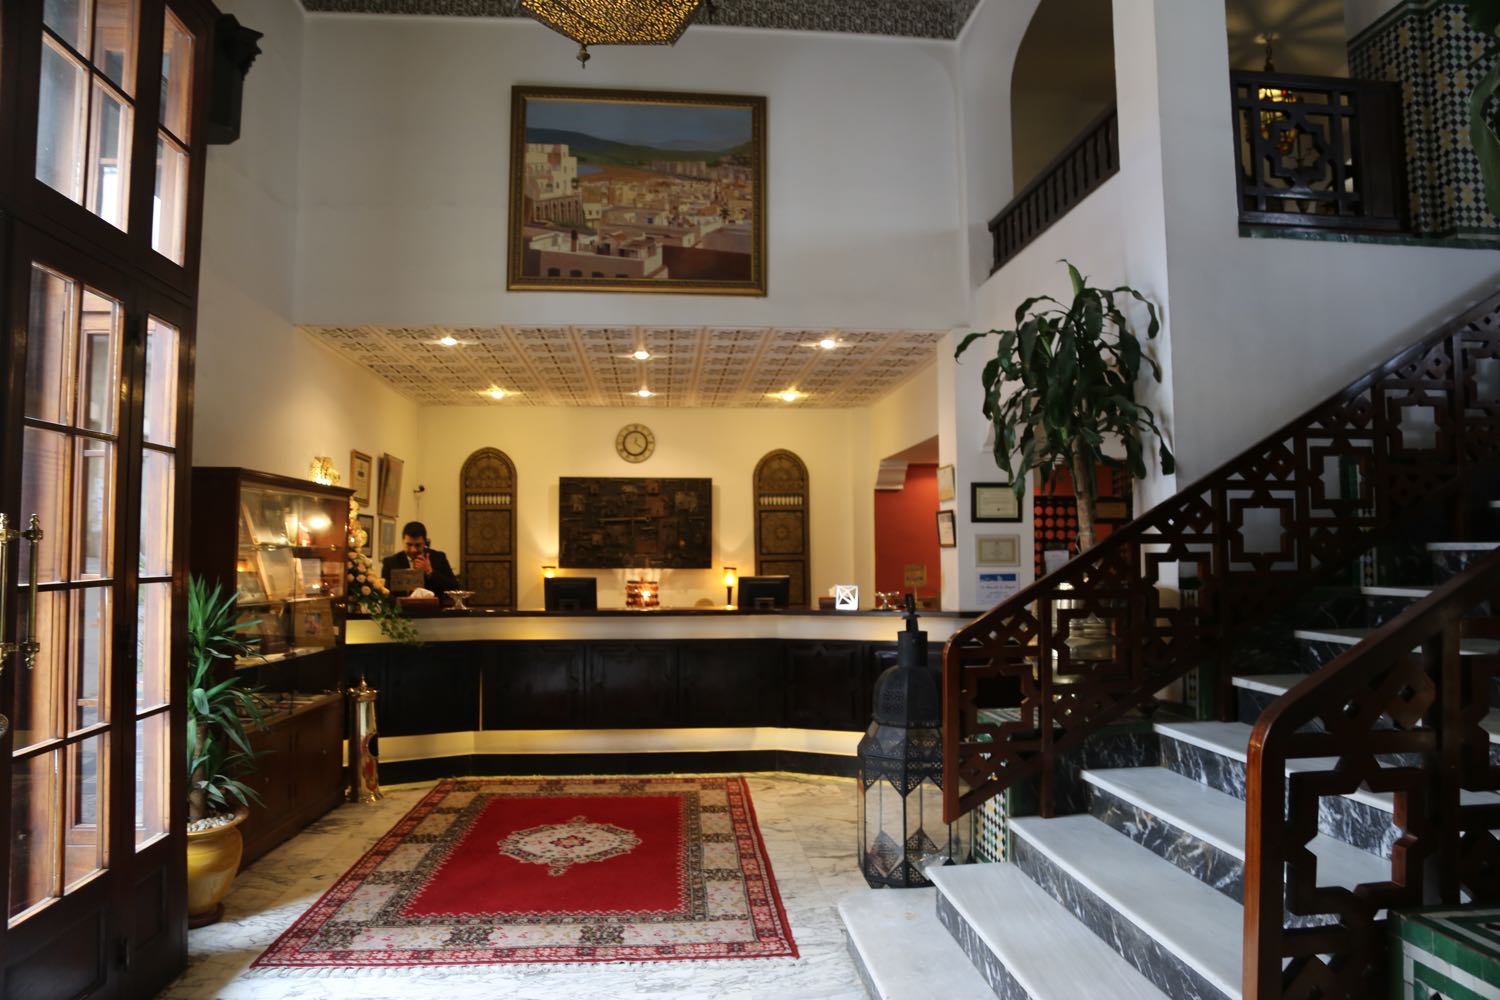 View of the reception from across the lobby